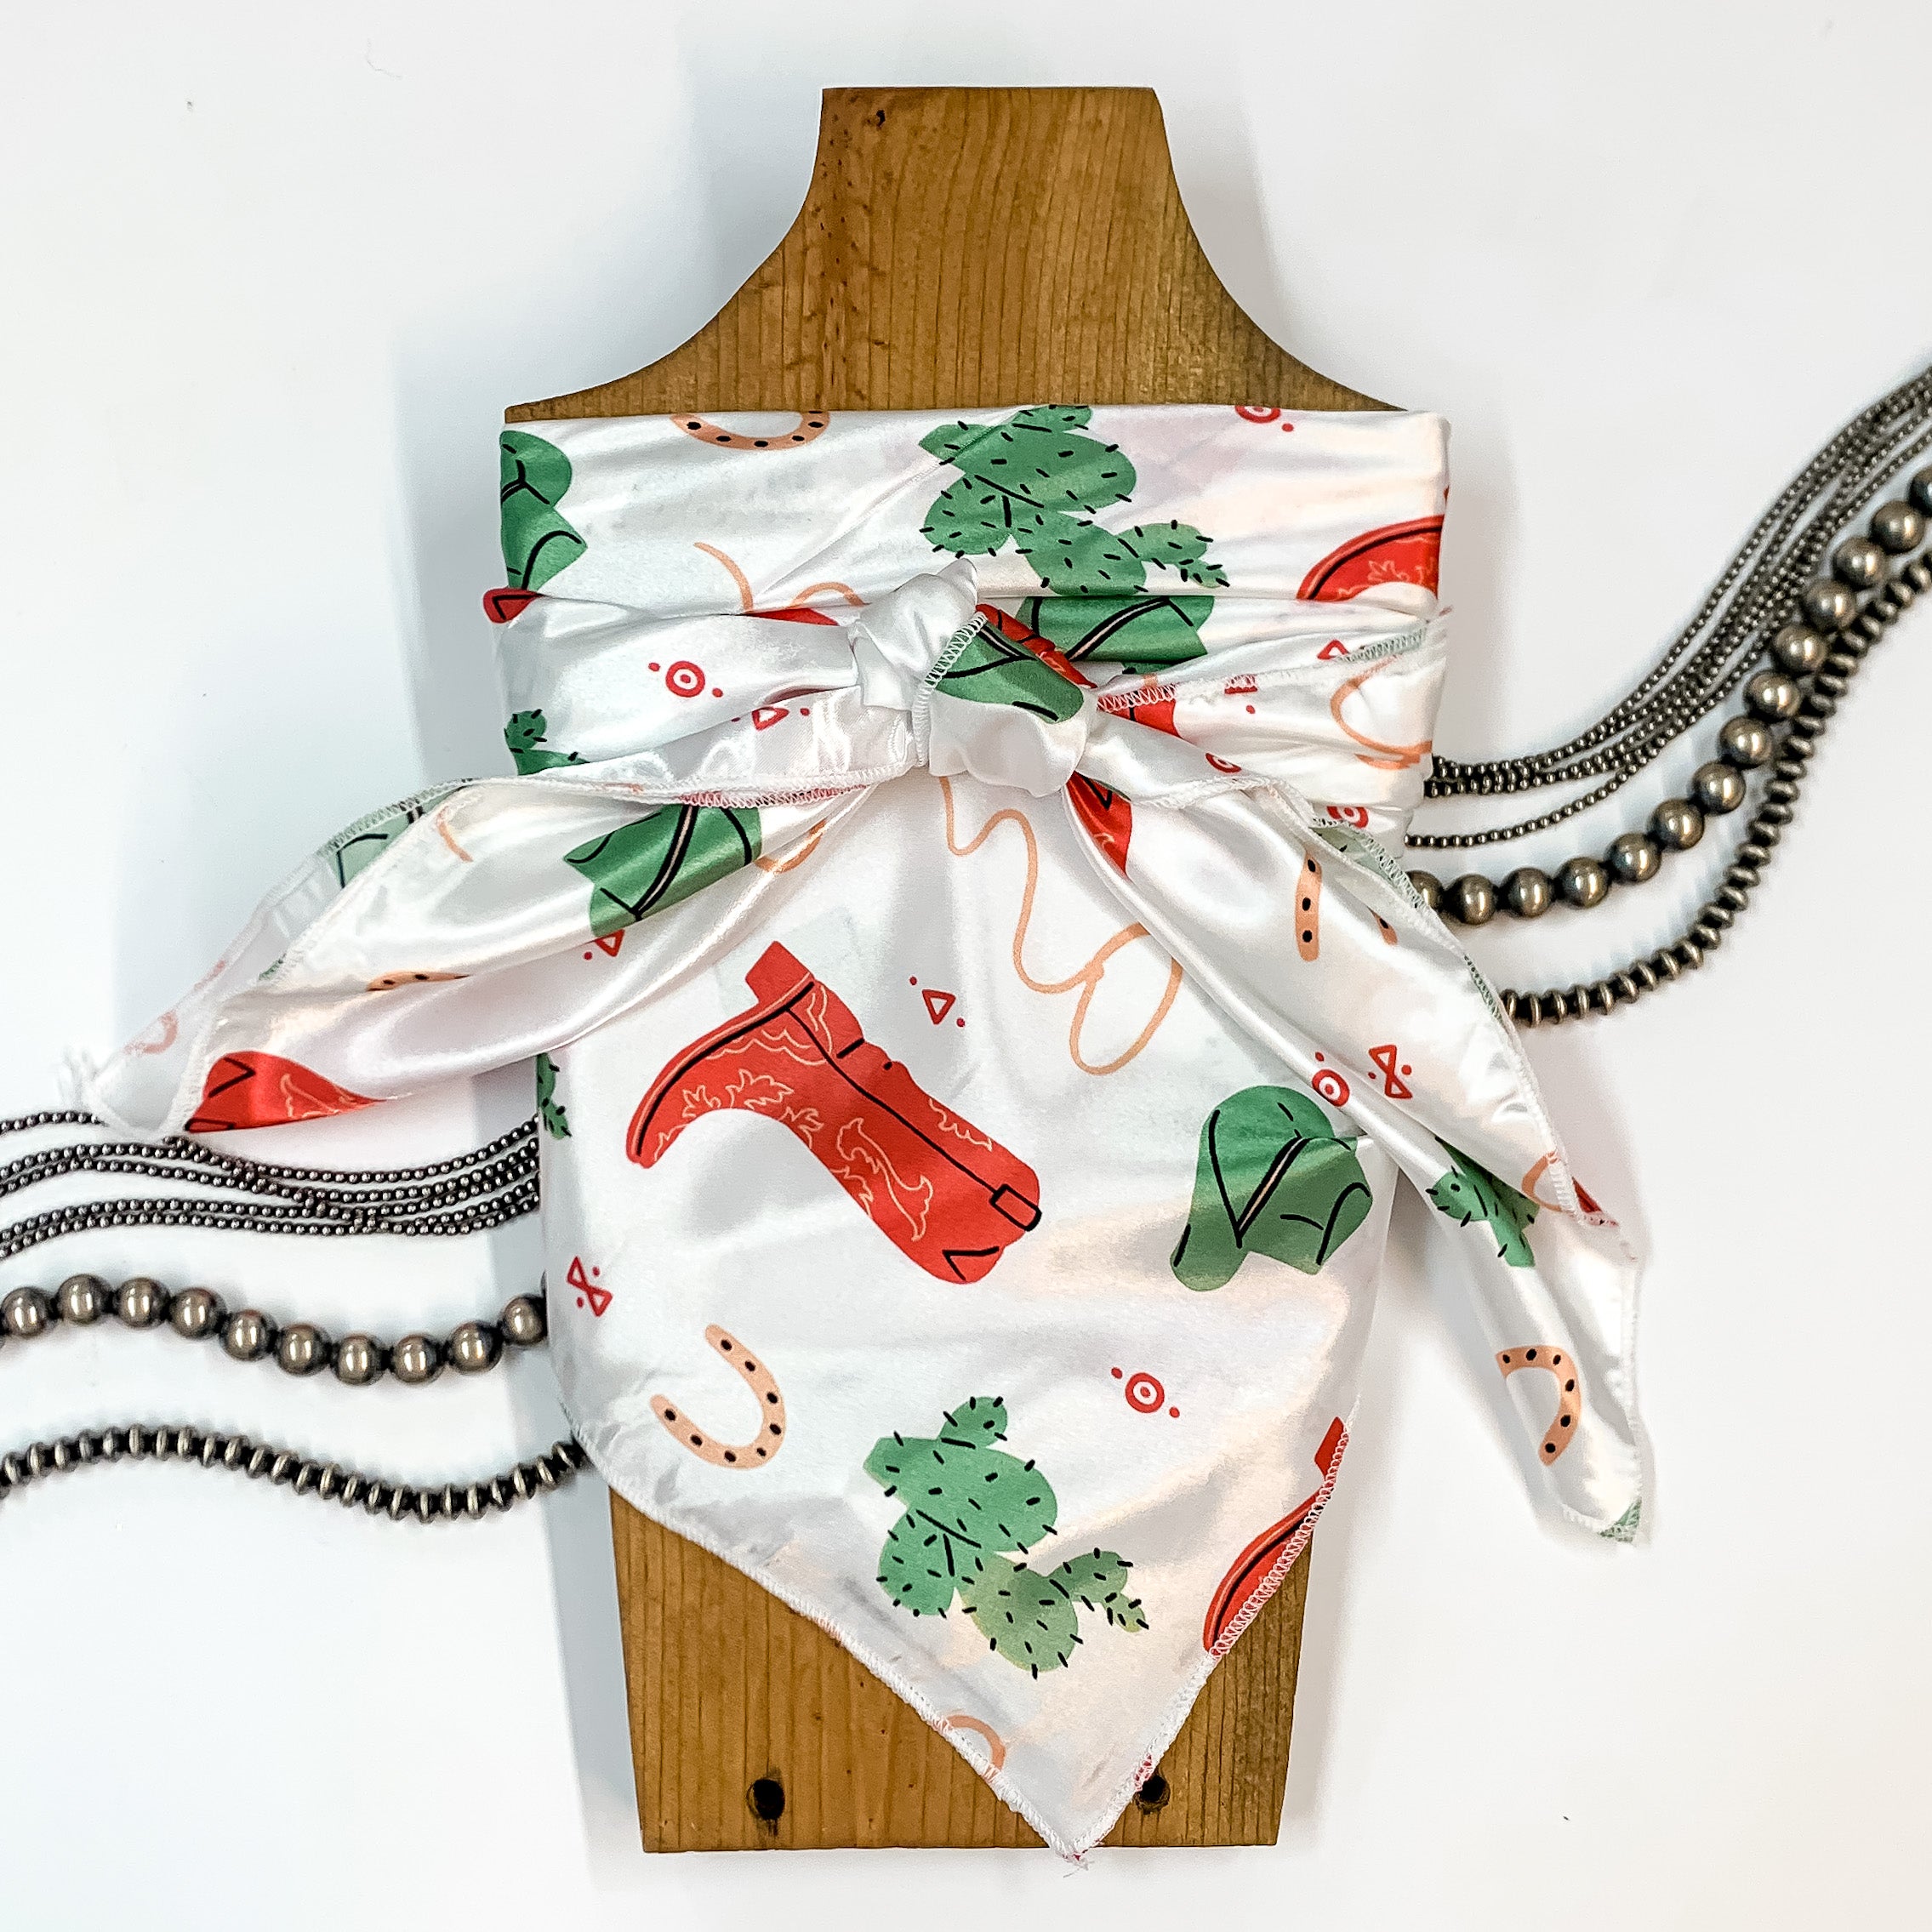 Patterned scarf in Boozy Boot. Scarf is tied around a wooden piece. The scarf and piece of wood is pictured on a white background with Navajo jewelry spread out around it.